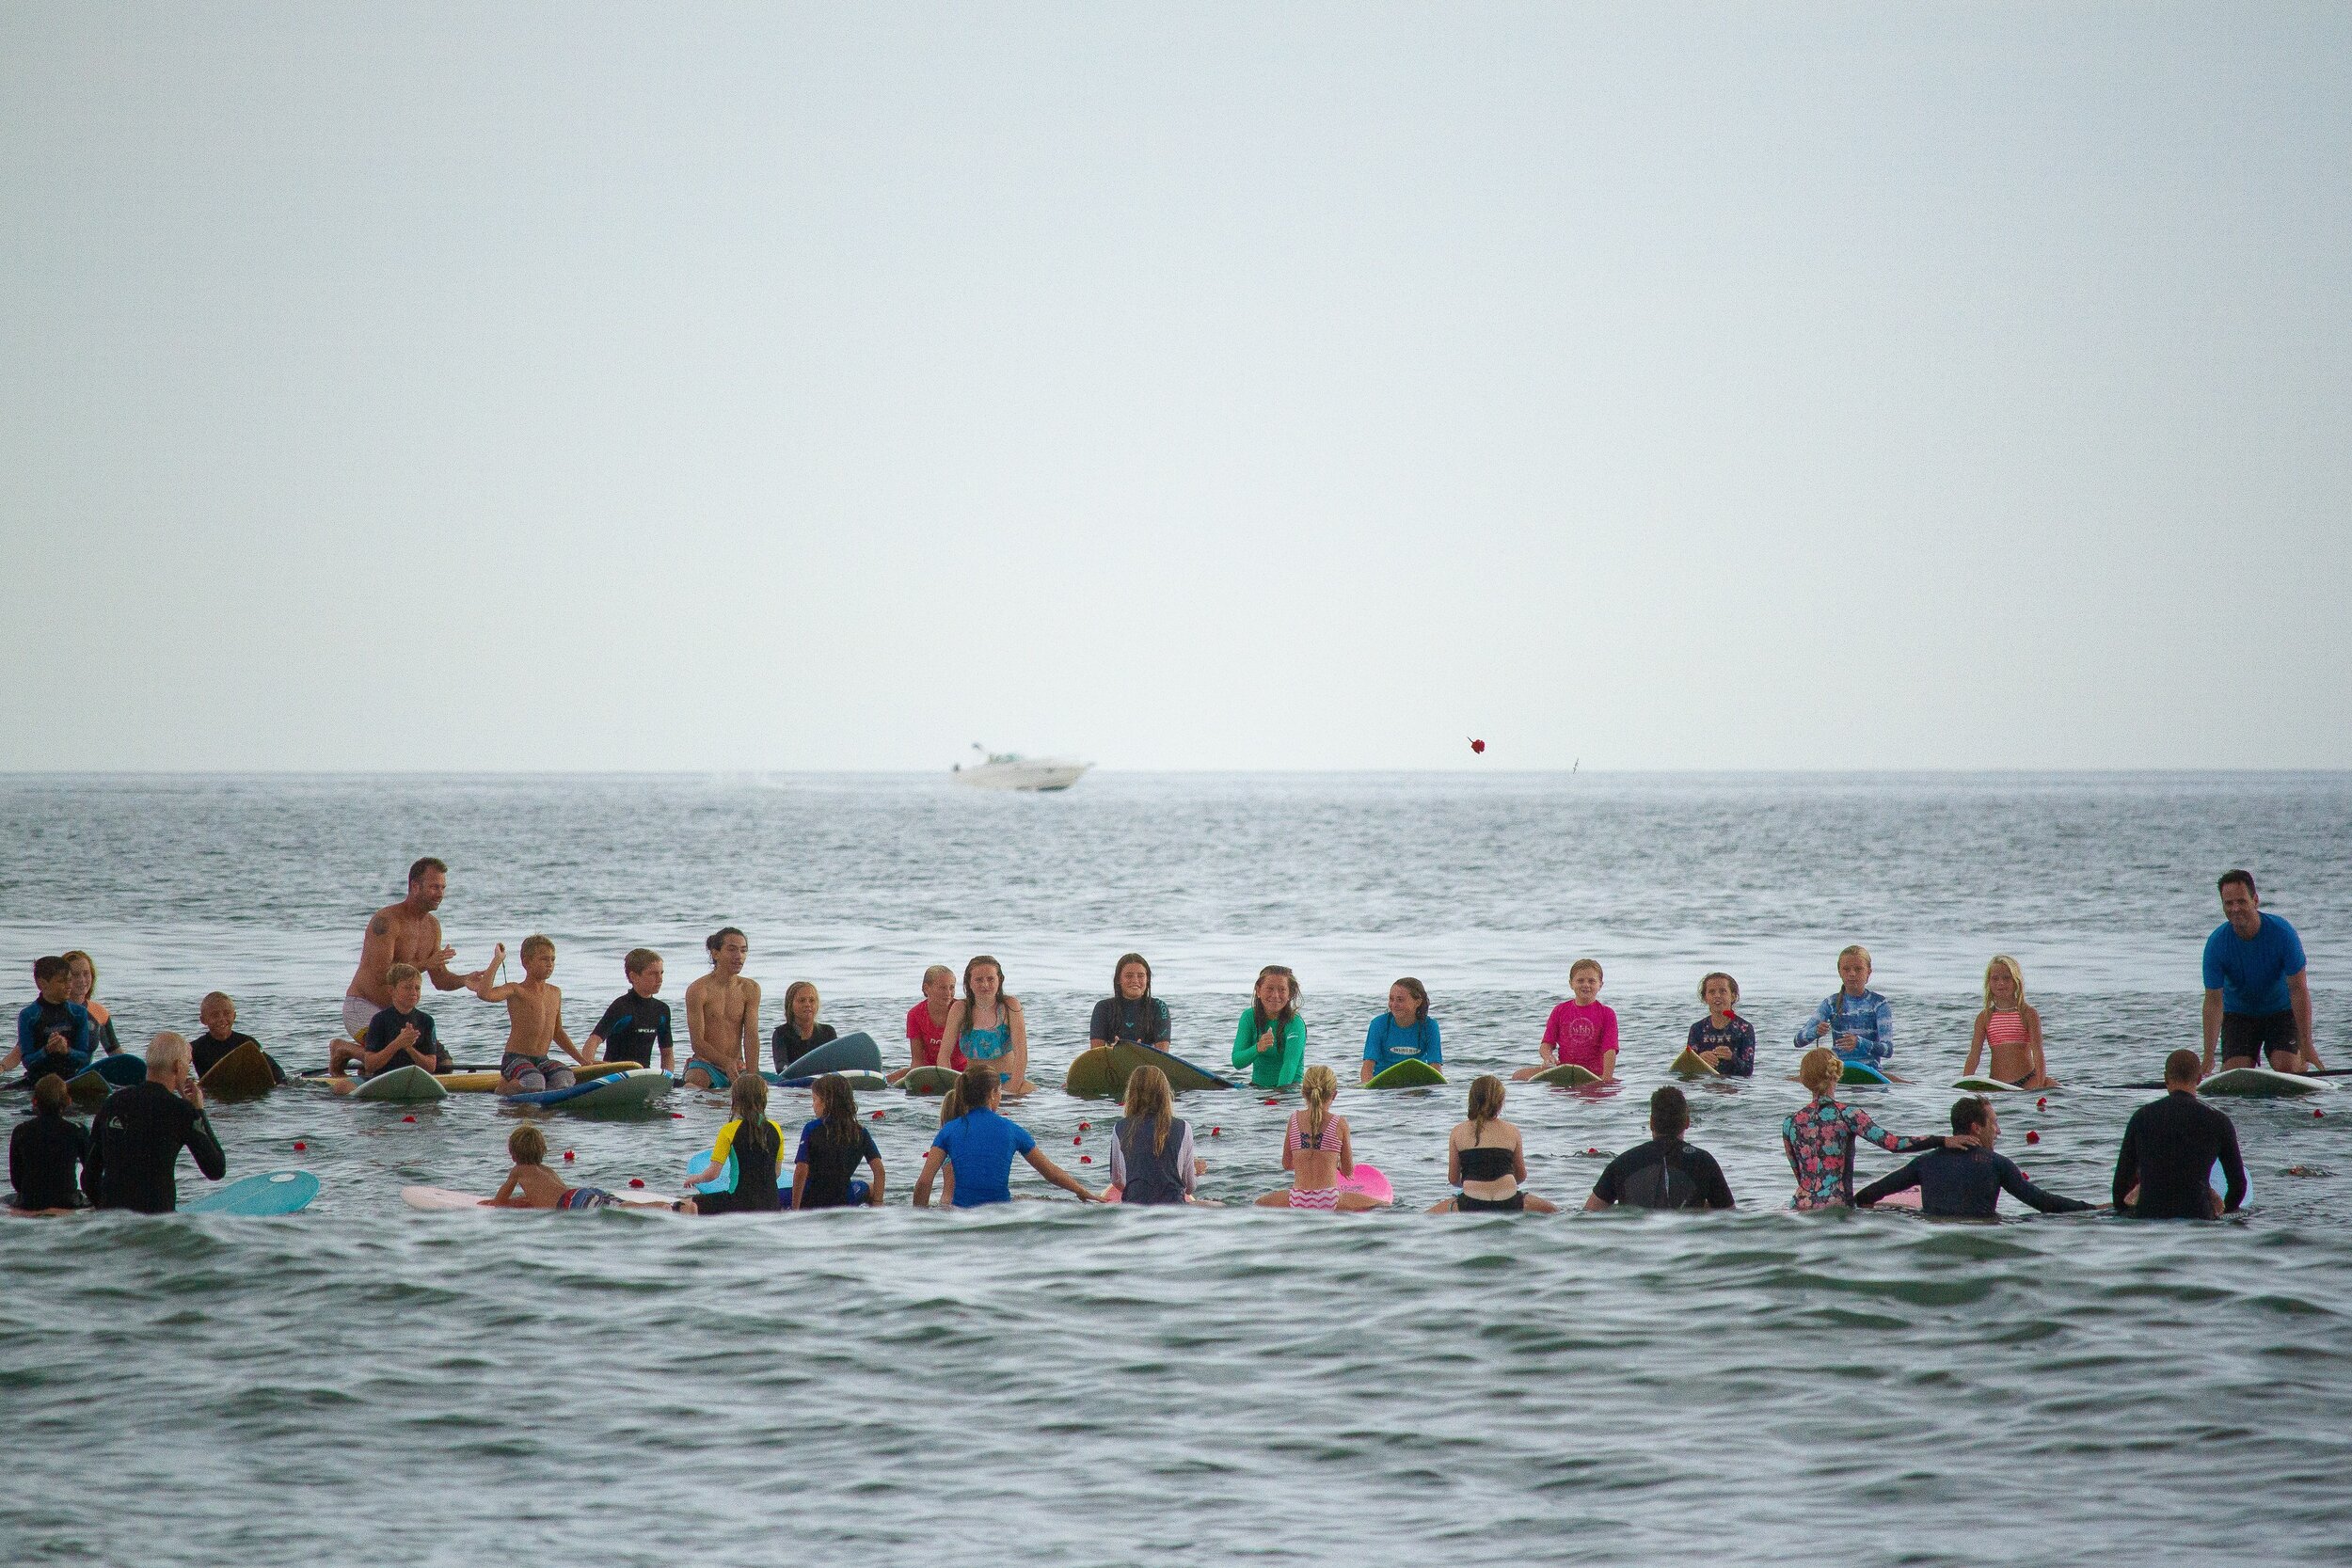   At the end of the day, surfers paddled out together and formed a circle, honoring Richie's memory with kind words and by tossing red carnations into the water.&nbsp;  